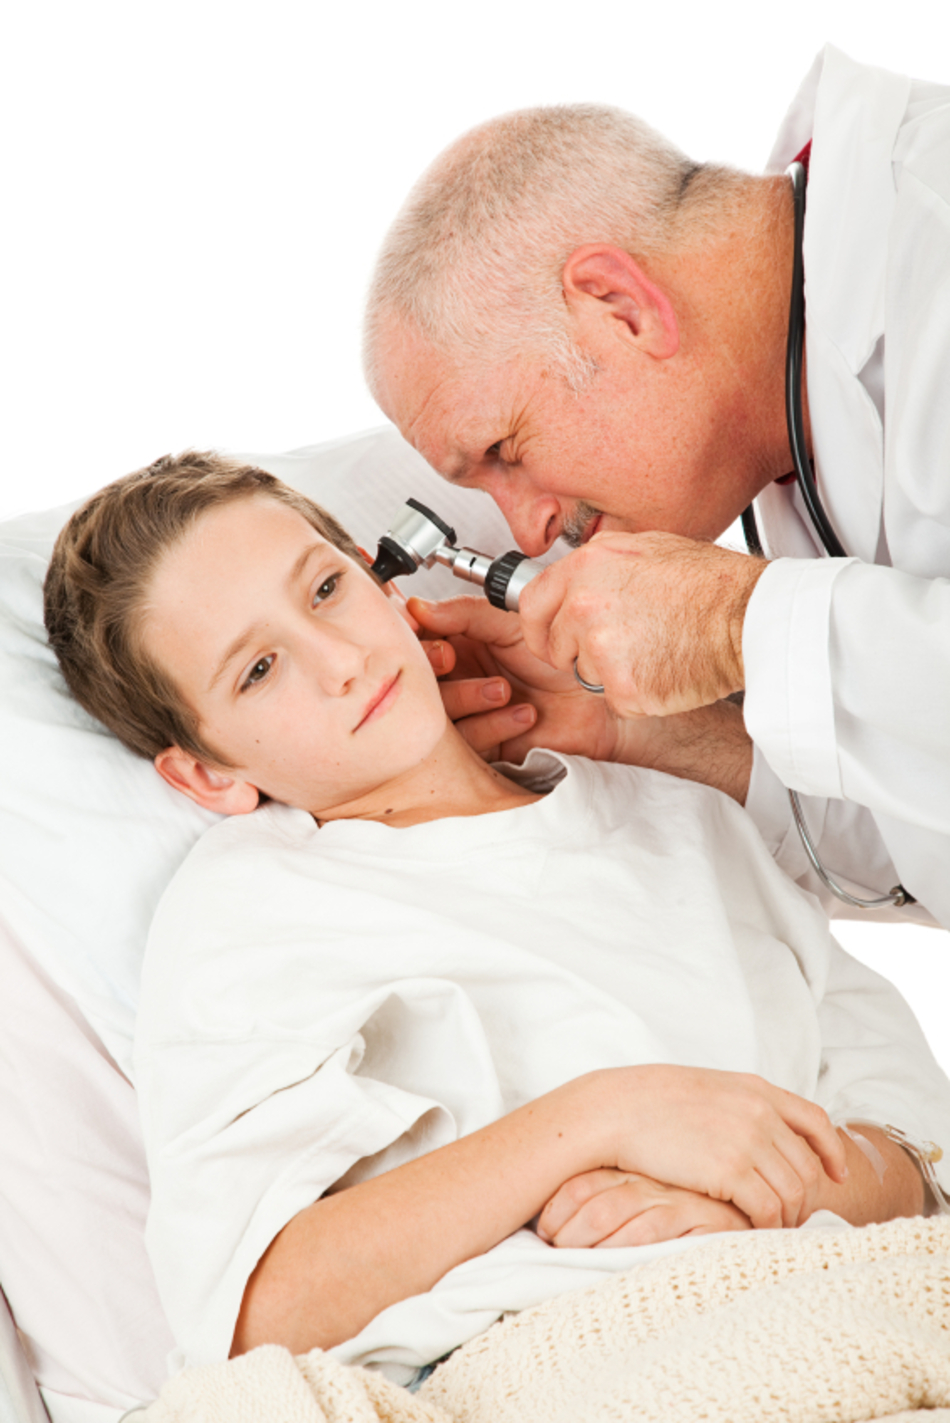 Racial Disparities in Treatment of Ear Infections May Contribute to Antibiotic Overuse